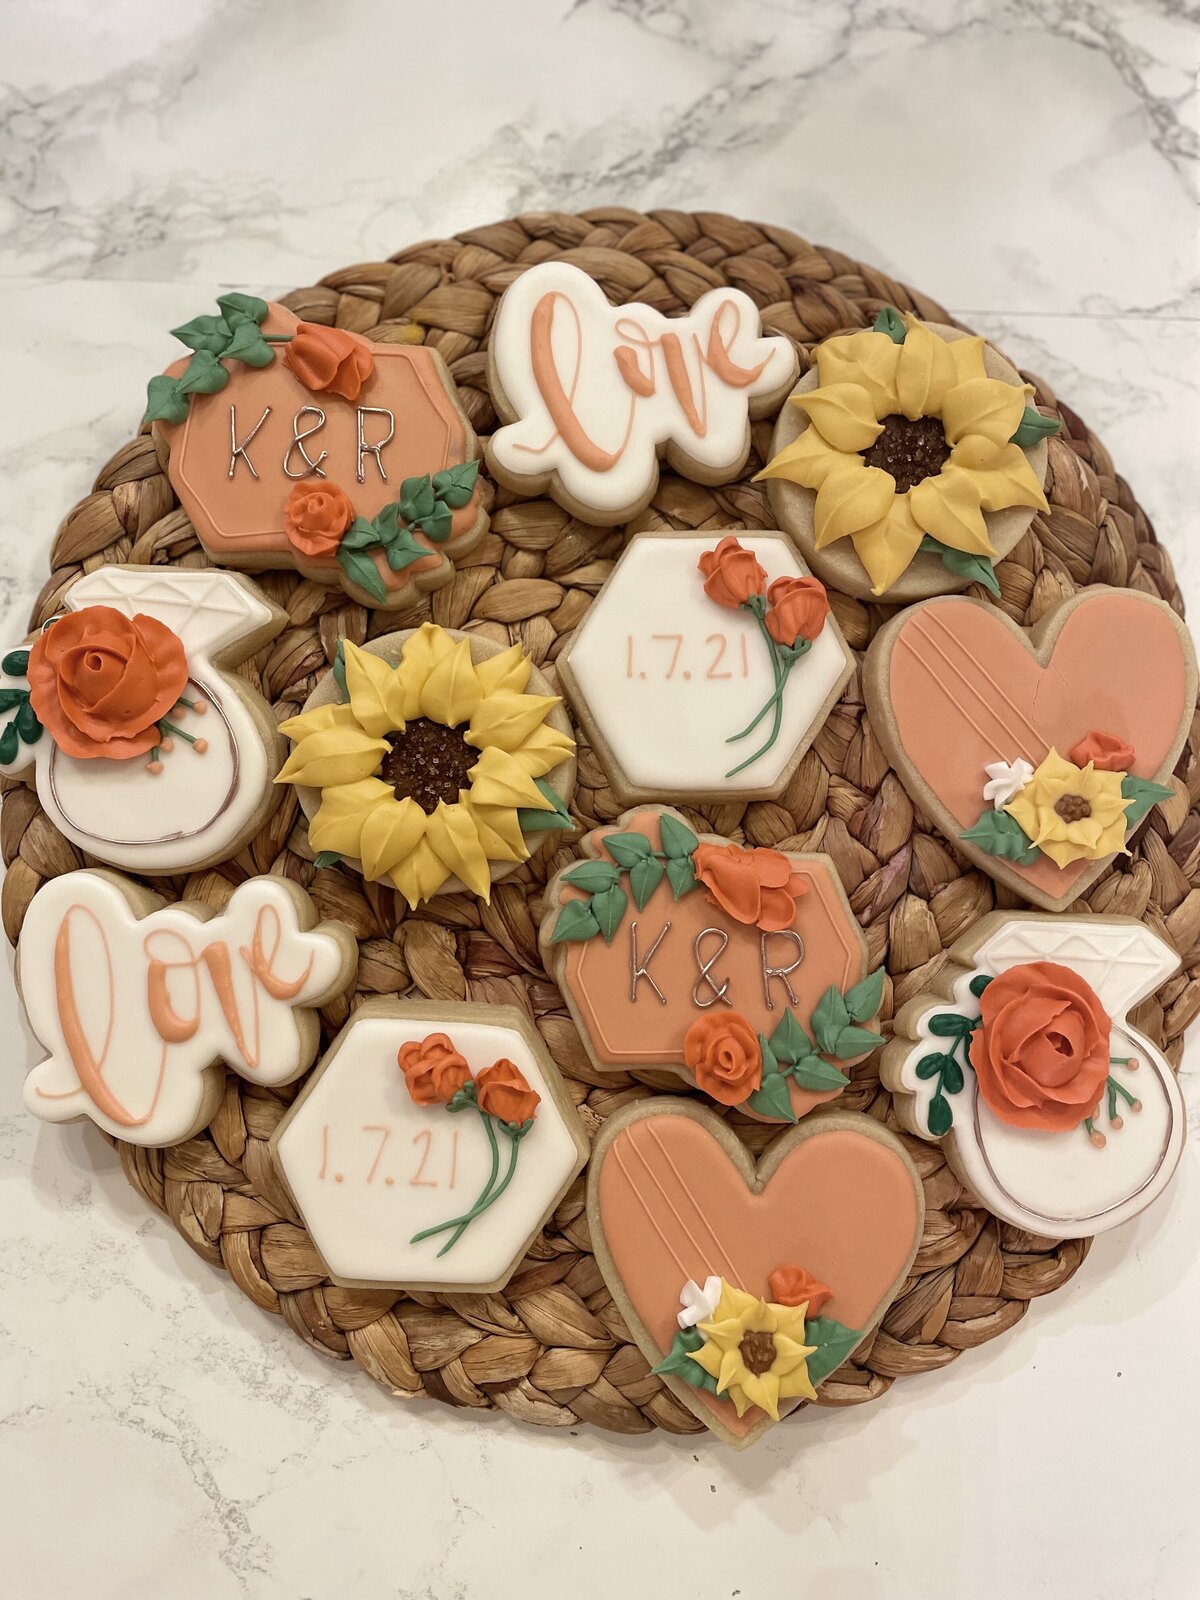 Custom-designed sugar cookies with intricate icing details, perfect for birthdays, made in Gilbert.